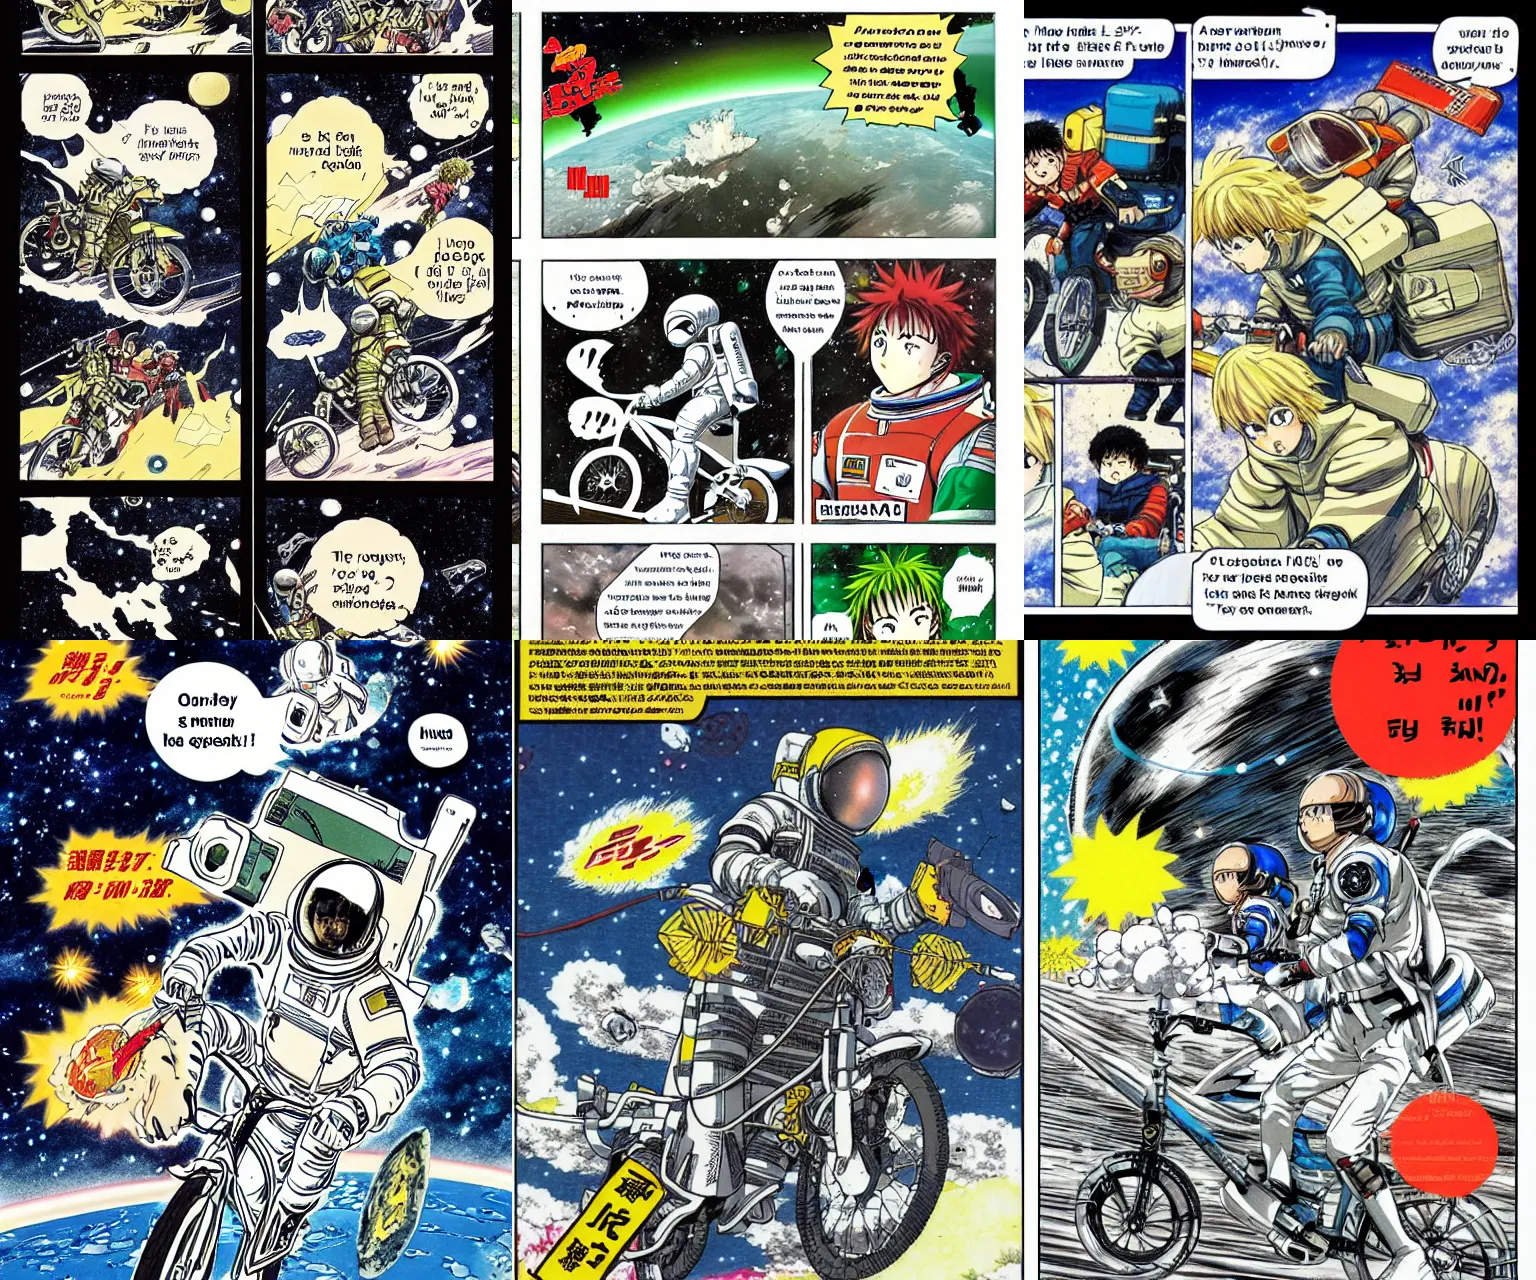 Prompt: page of a shonen manga about an astronaut riding a bike in space, color edition, speech bubbles with lots of text, art by Kentaro Miura